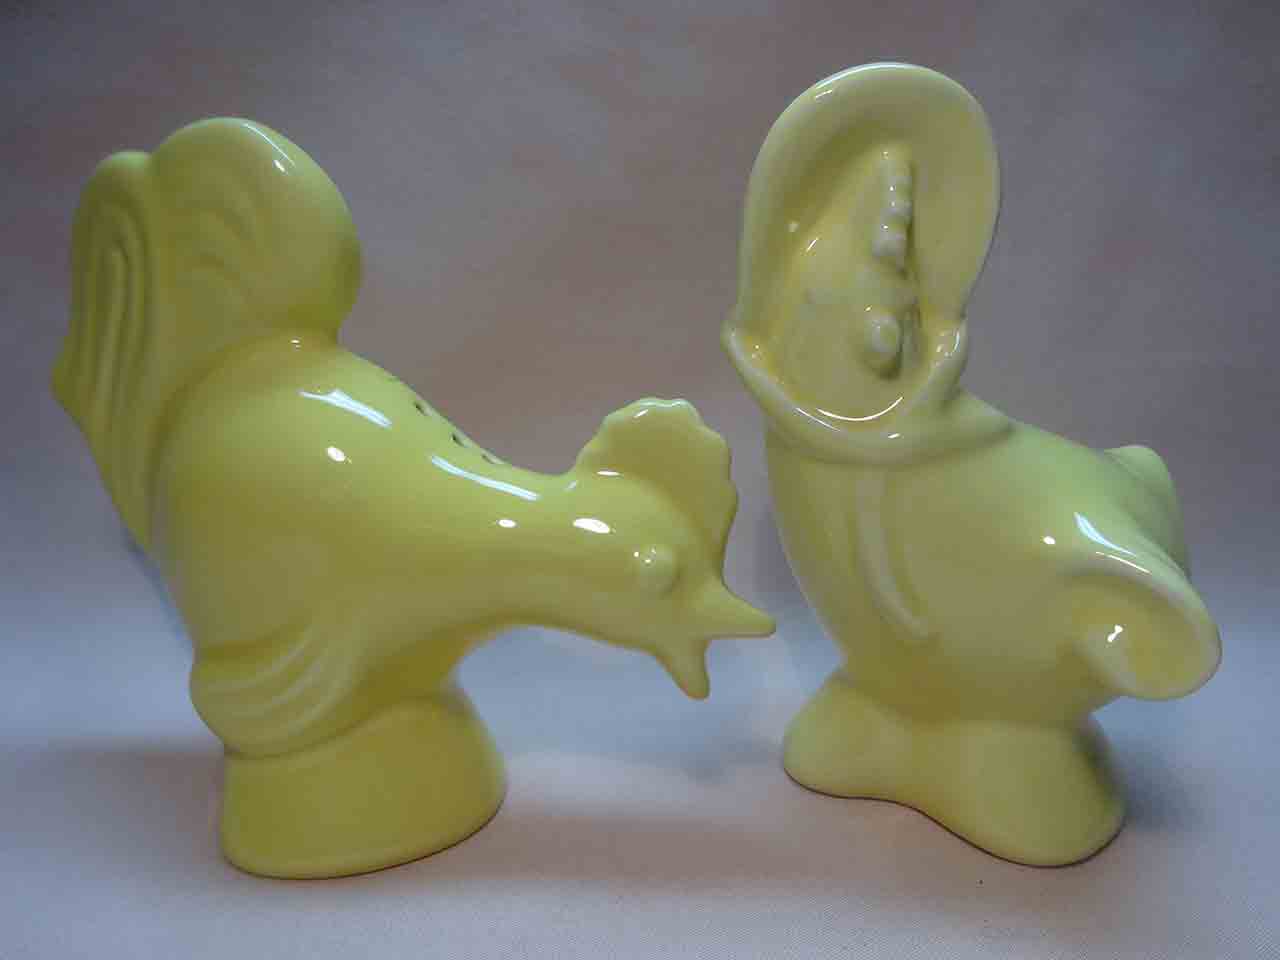 Pacific Pottery salt and pepper shakers - chickens